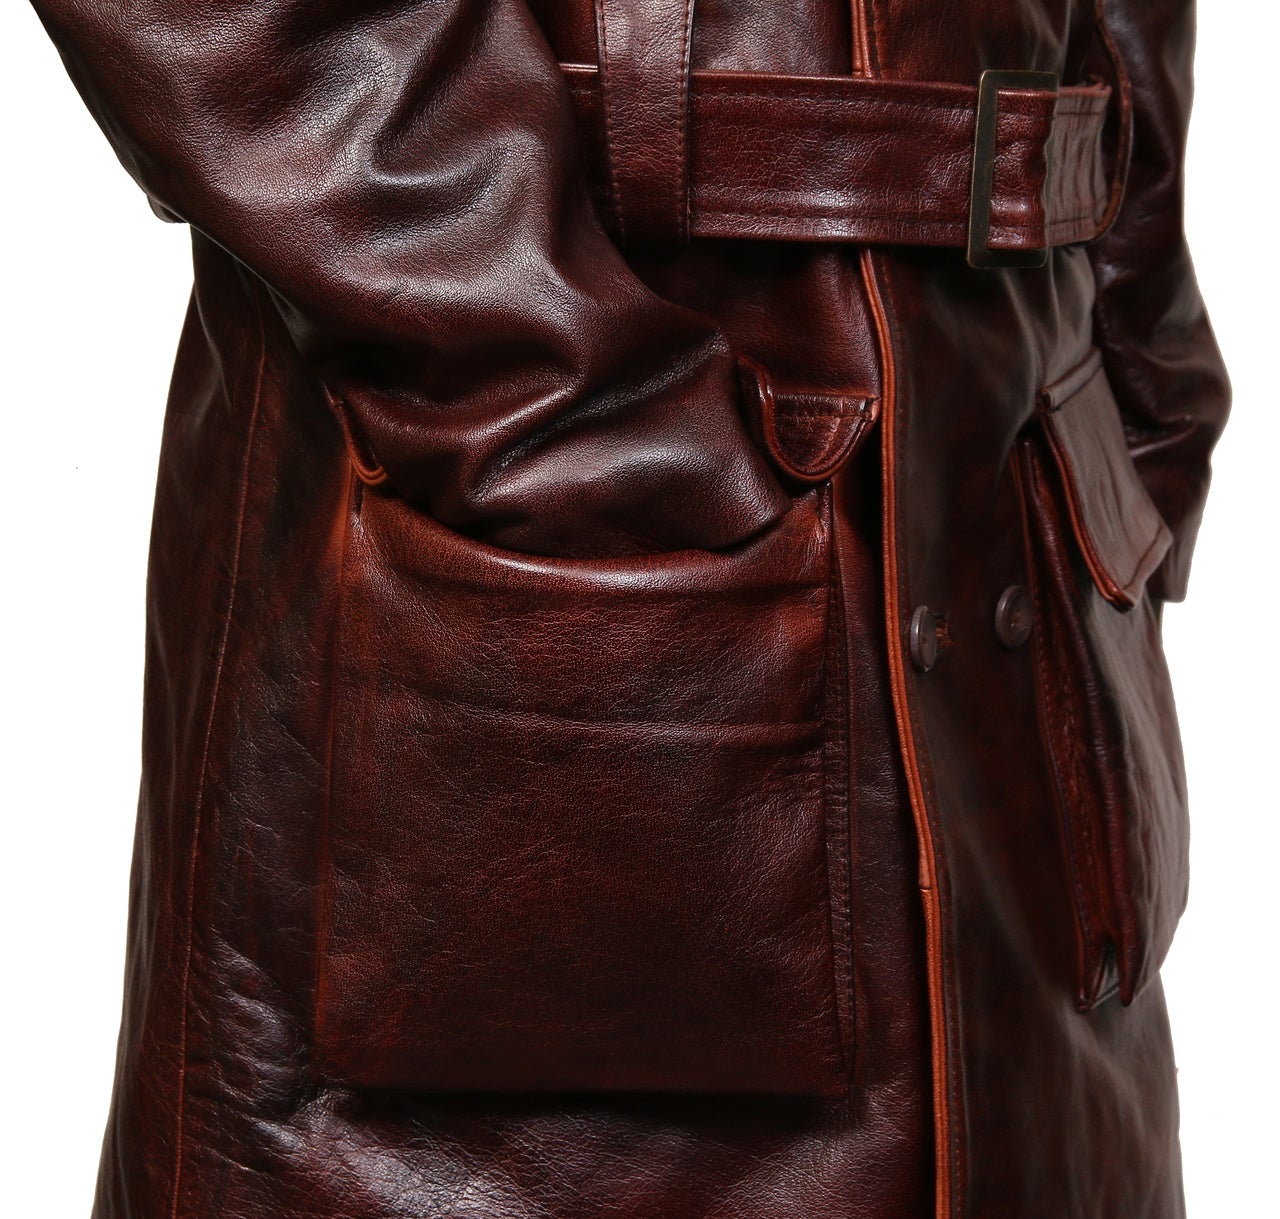 WW1 1917 U.S. Army Air Service Pilot Flying Barnstormer Coat - SouthBeachLeather